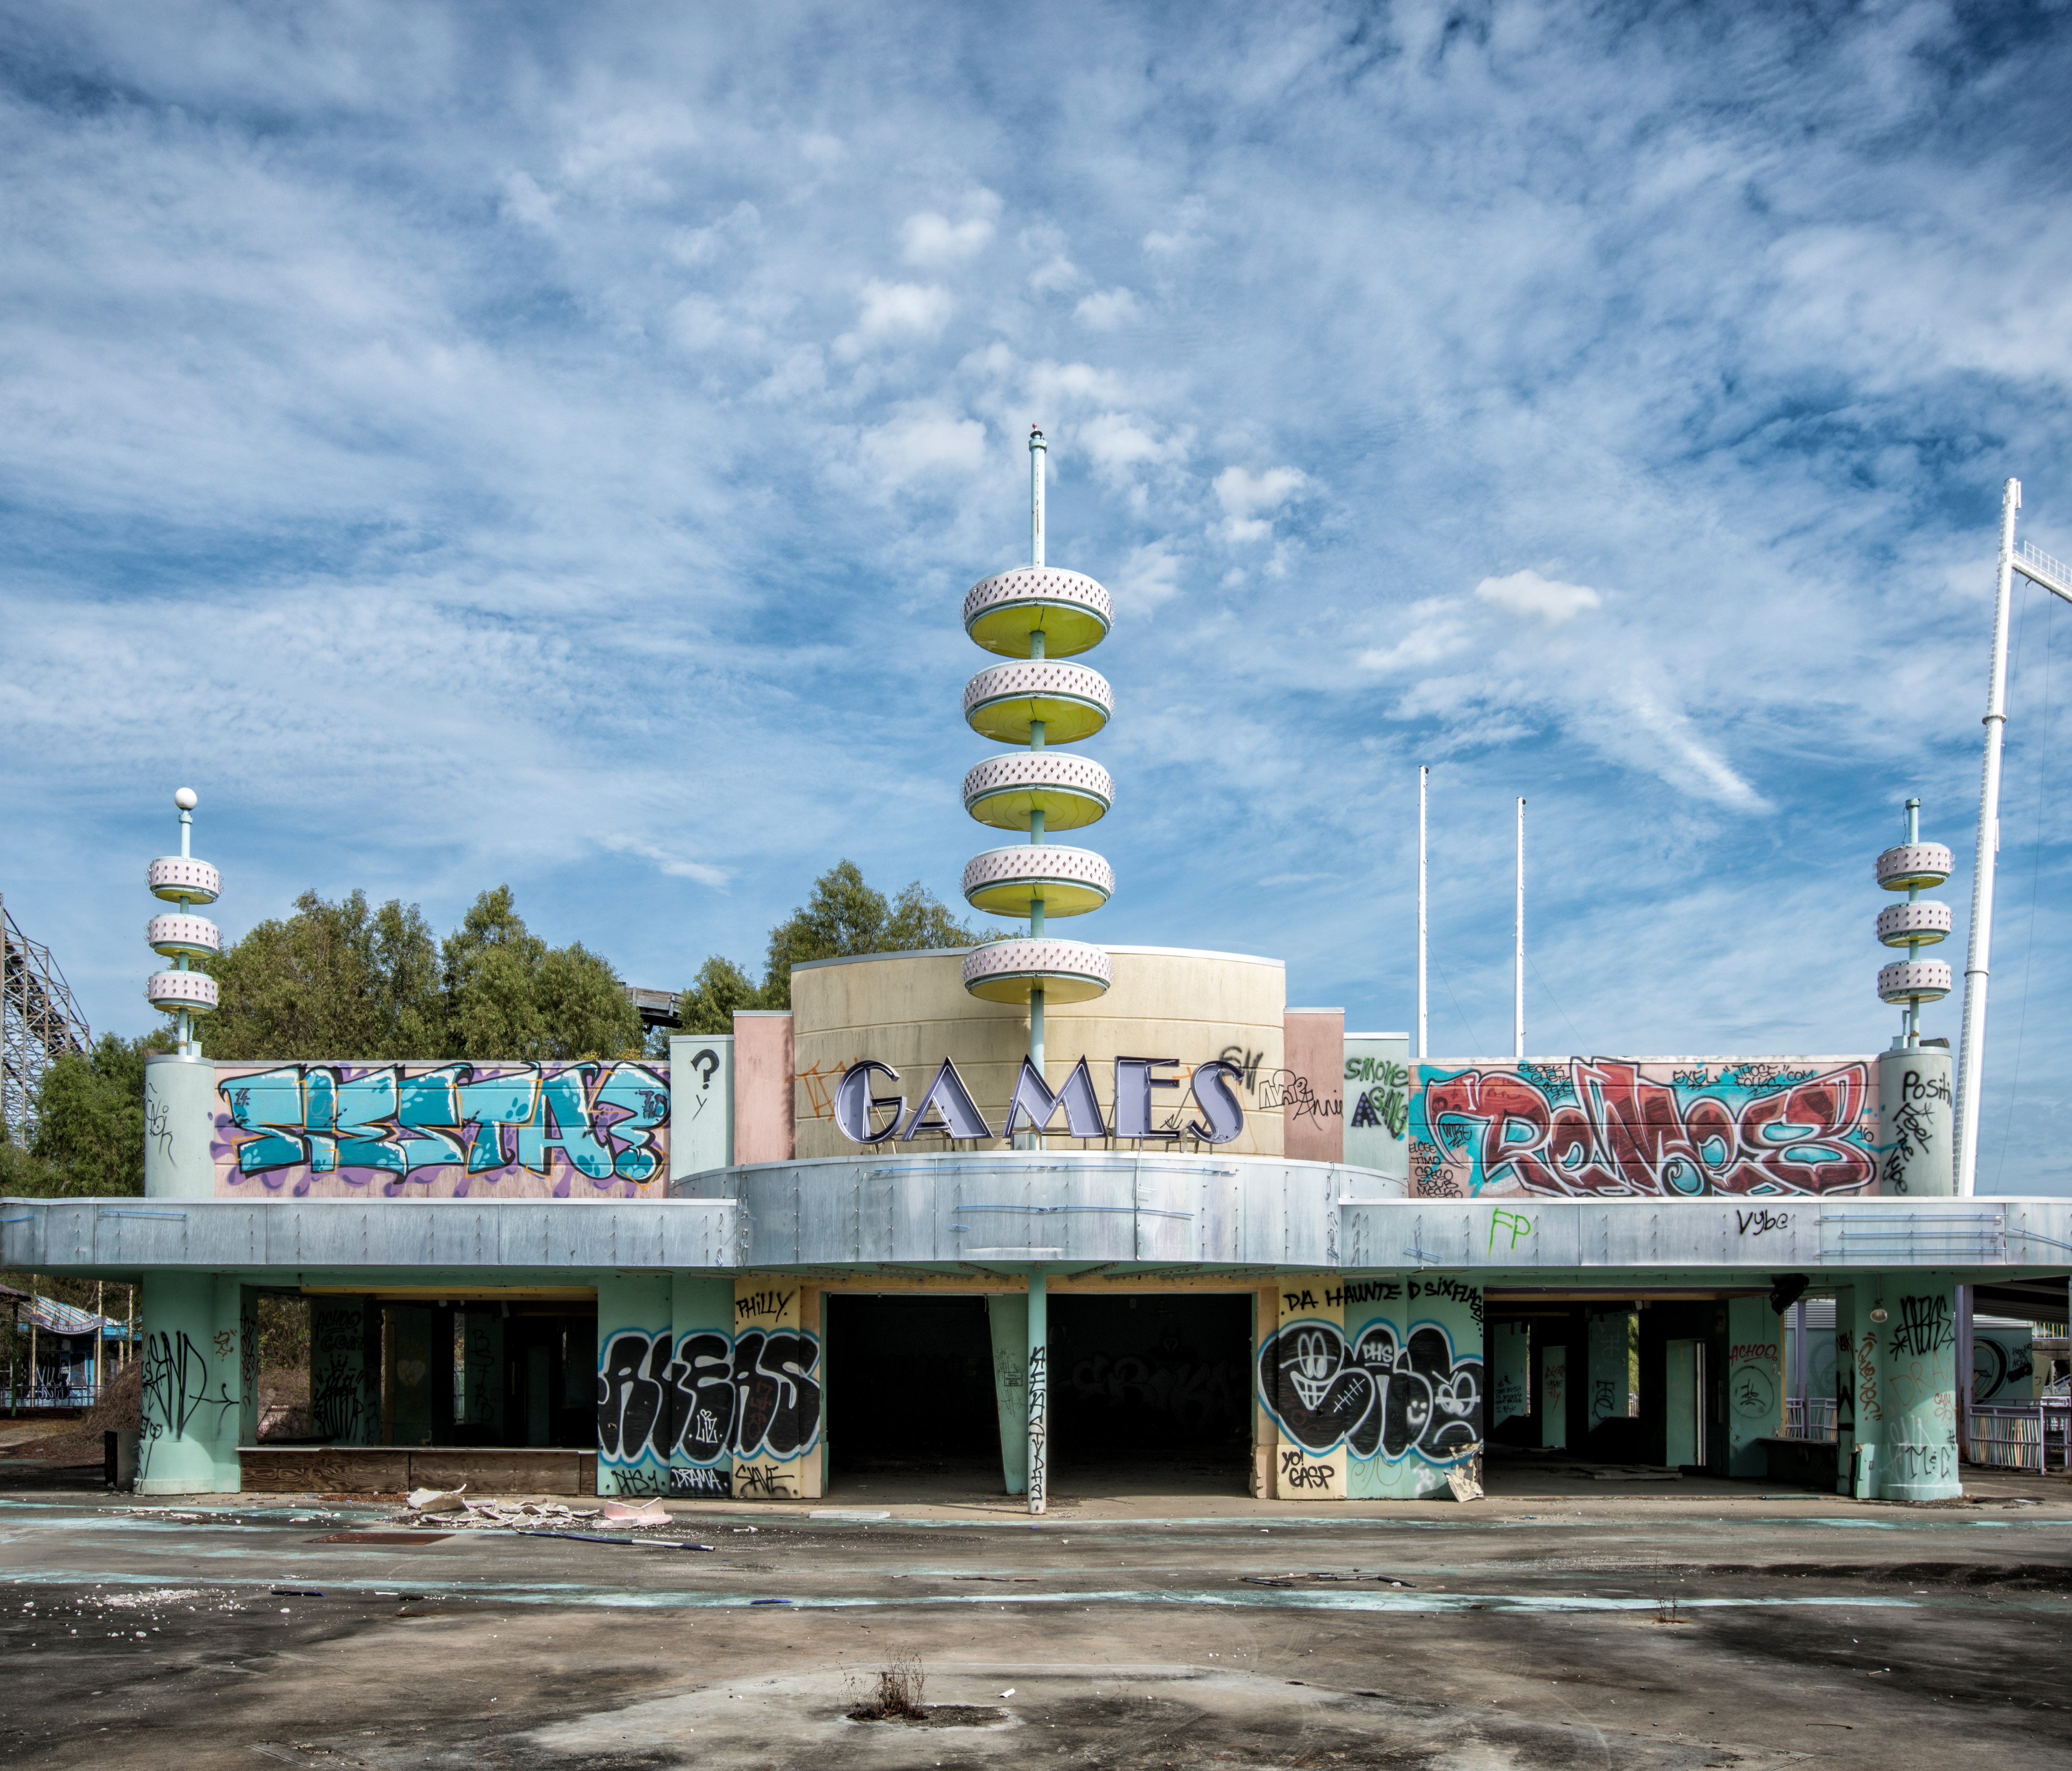 As of 2018 things are looking up for the property. There is what appears to be a solid plan to reopen the property as an amusement park again - a hopeful sign of recovery and growth for the area.